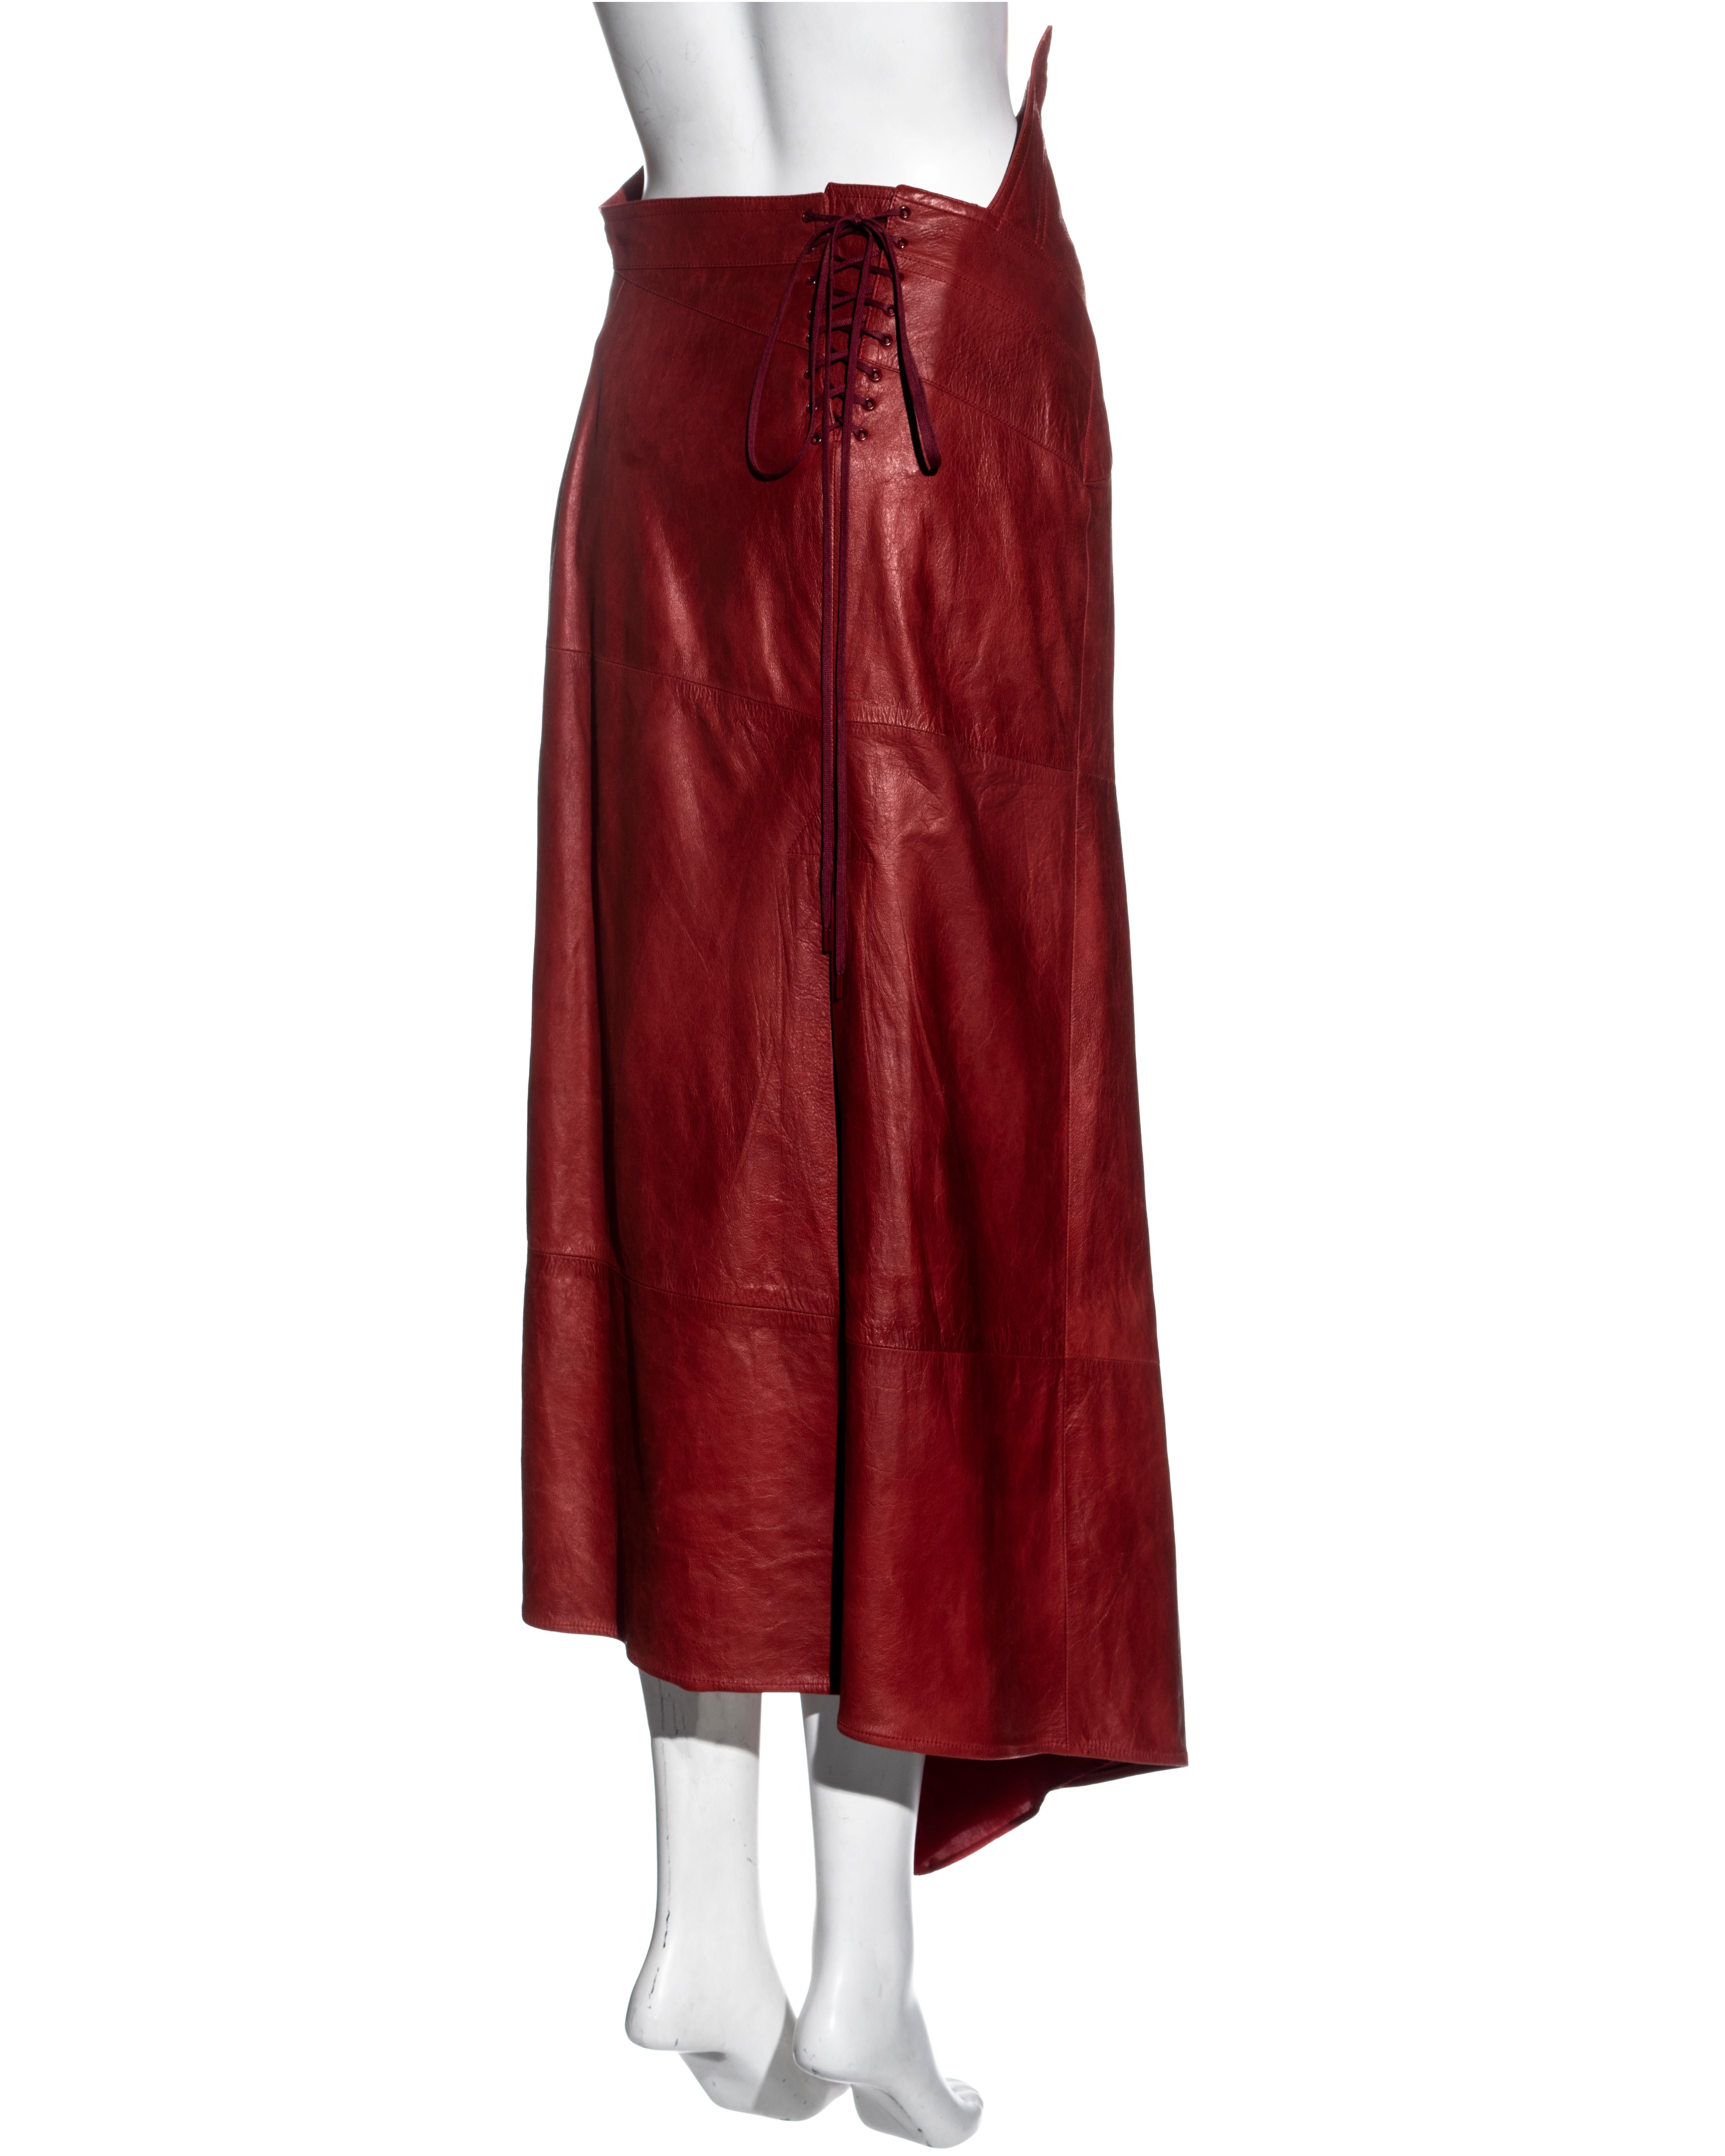 Christian Dior by John Galliano red leather asymmetric cut skirt, ss 2000 2